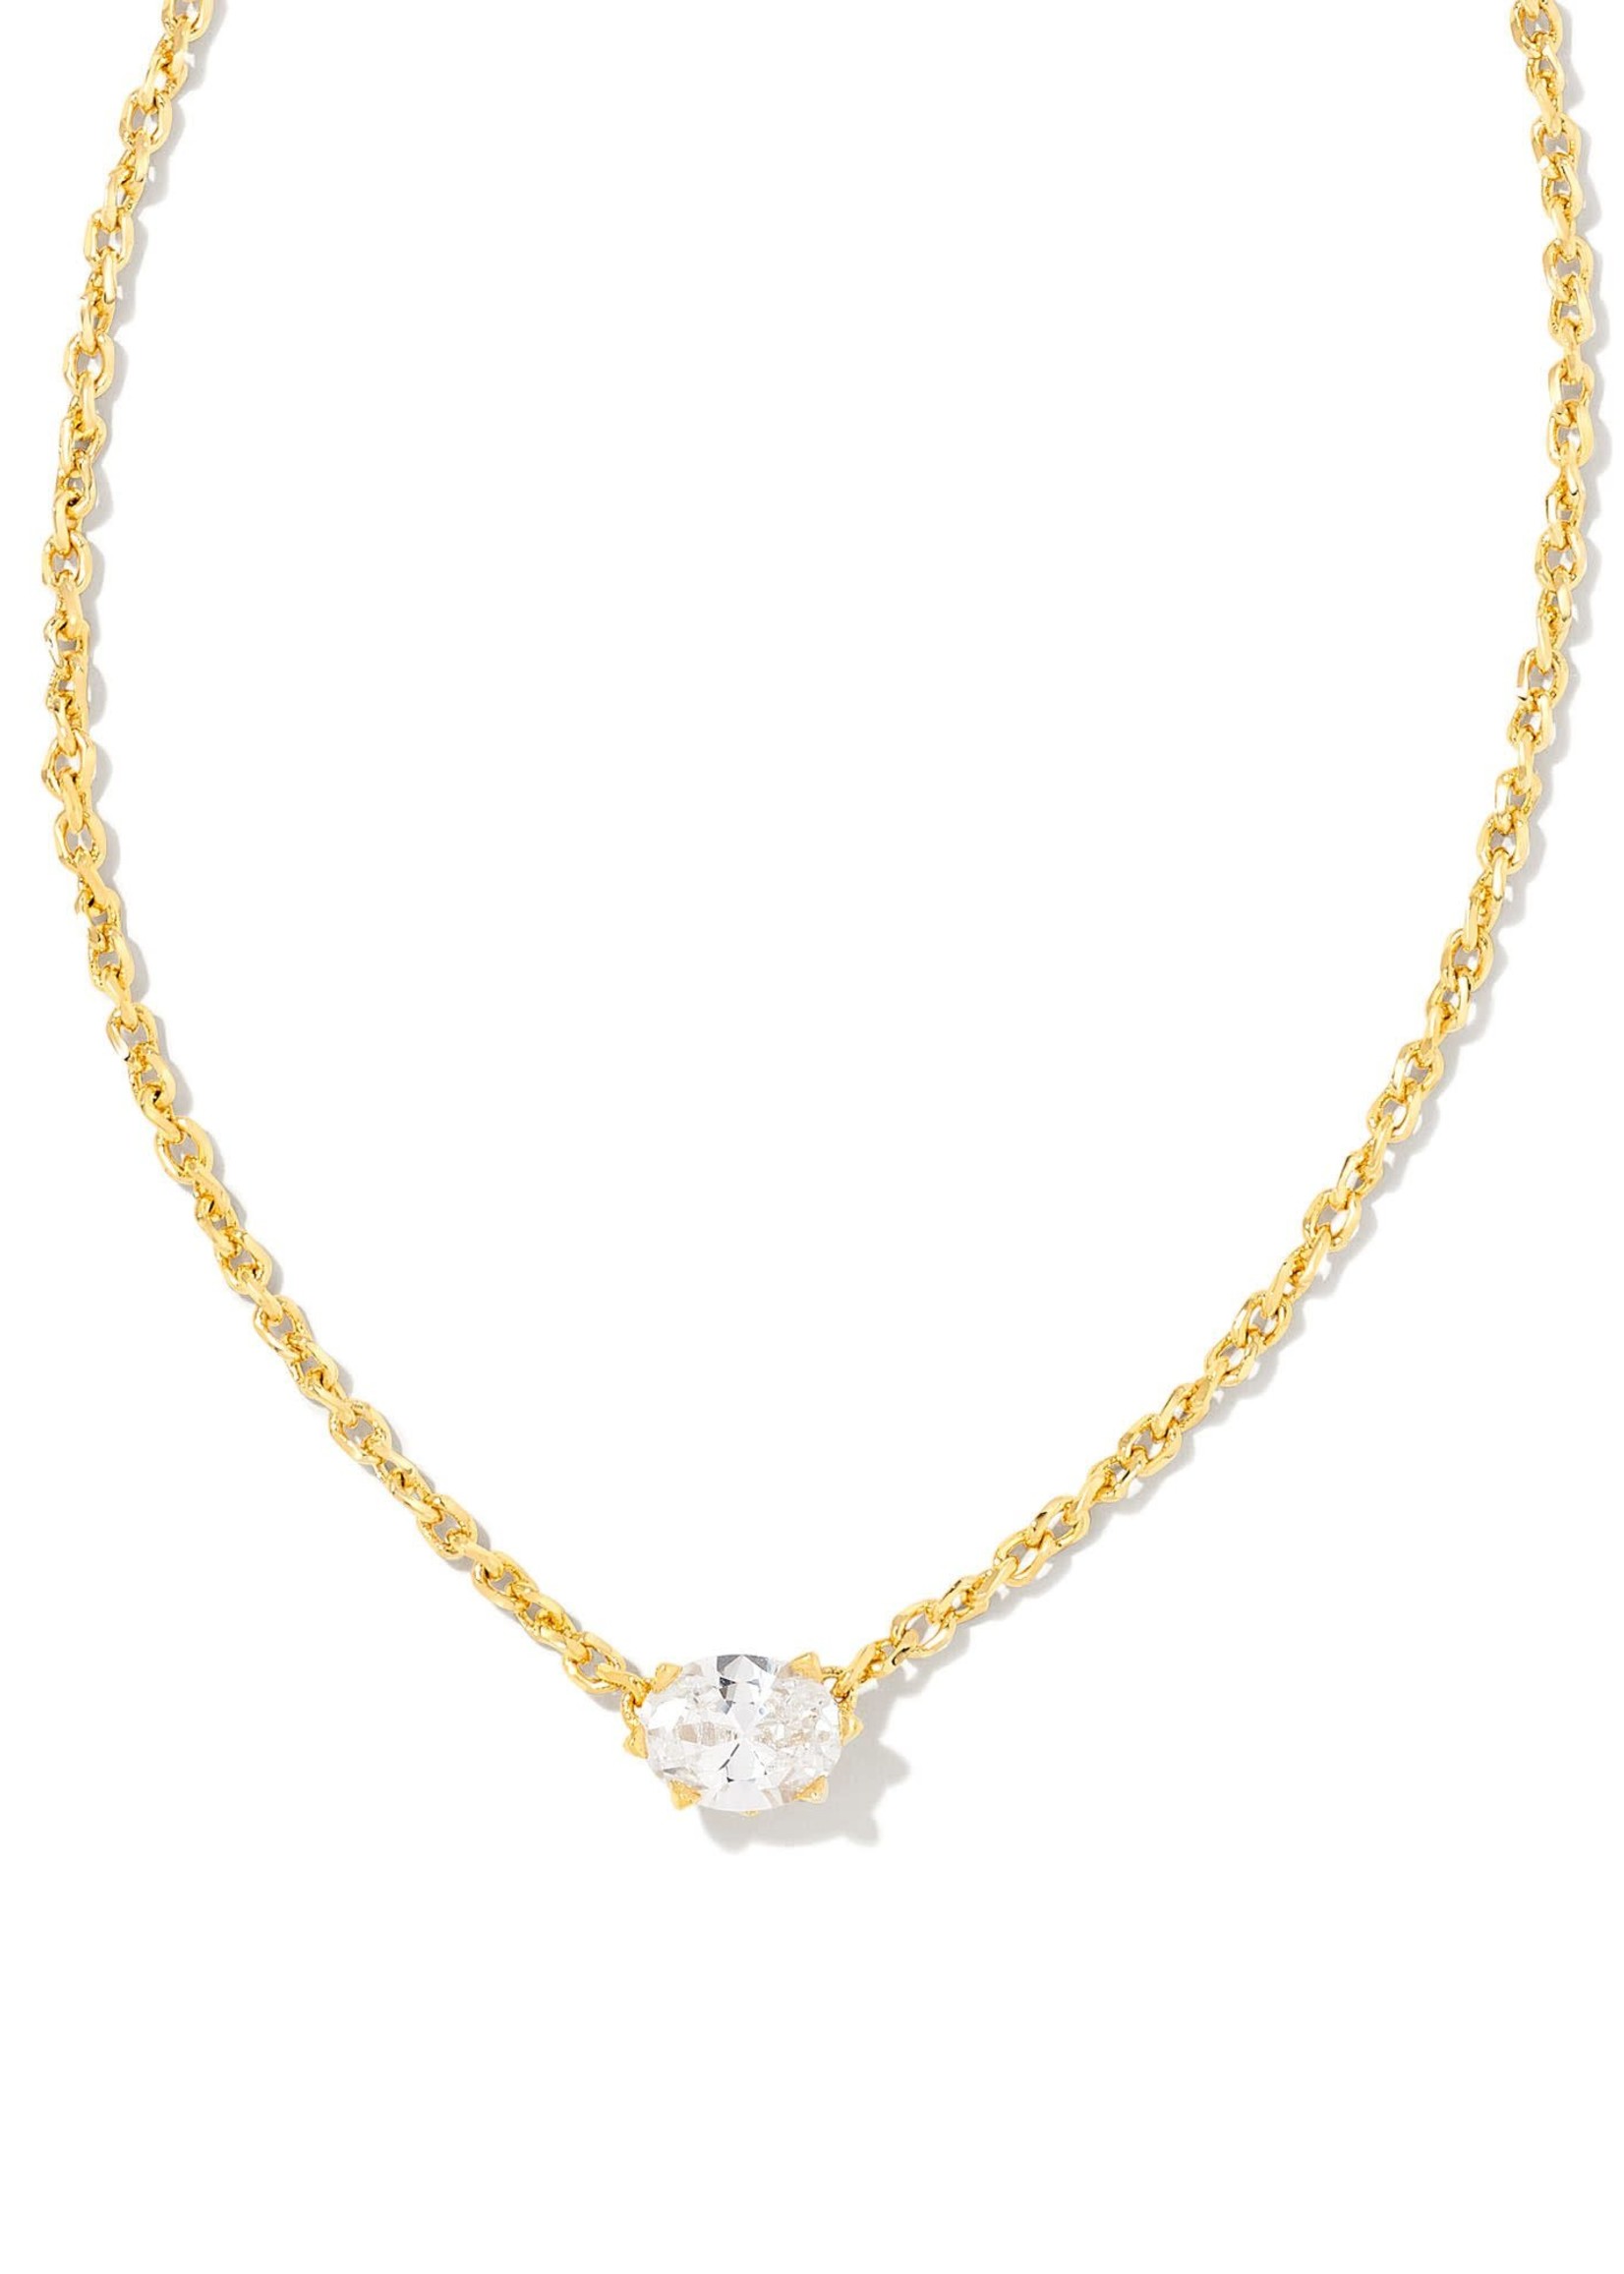 Kendra Scott CAILIN CRYSTAL PENDANT NECKLACE GOLD METAL WHITE CZ